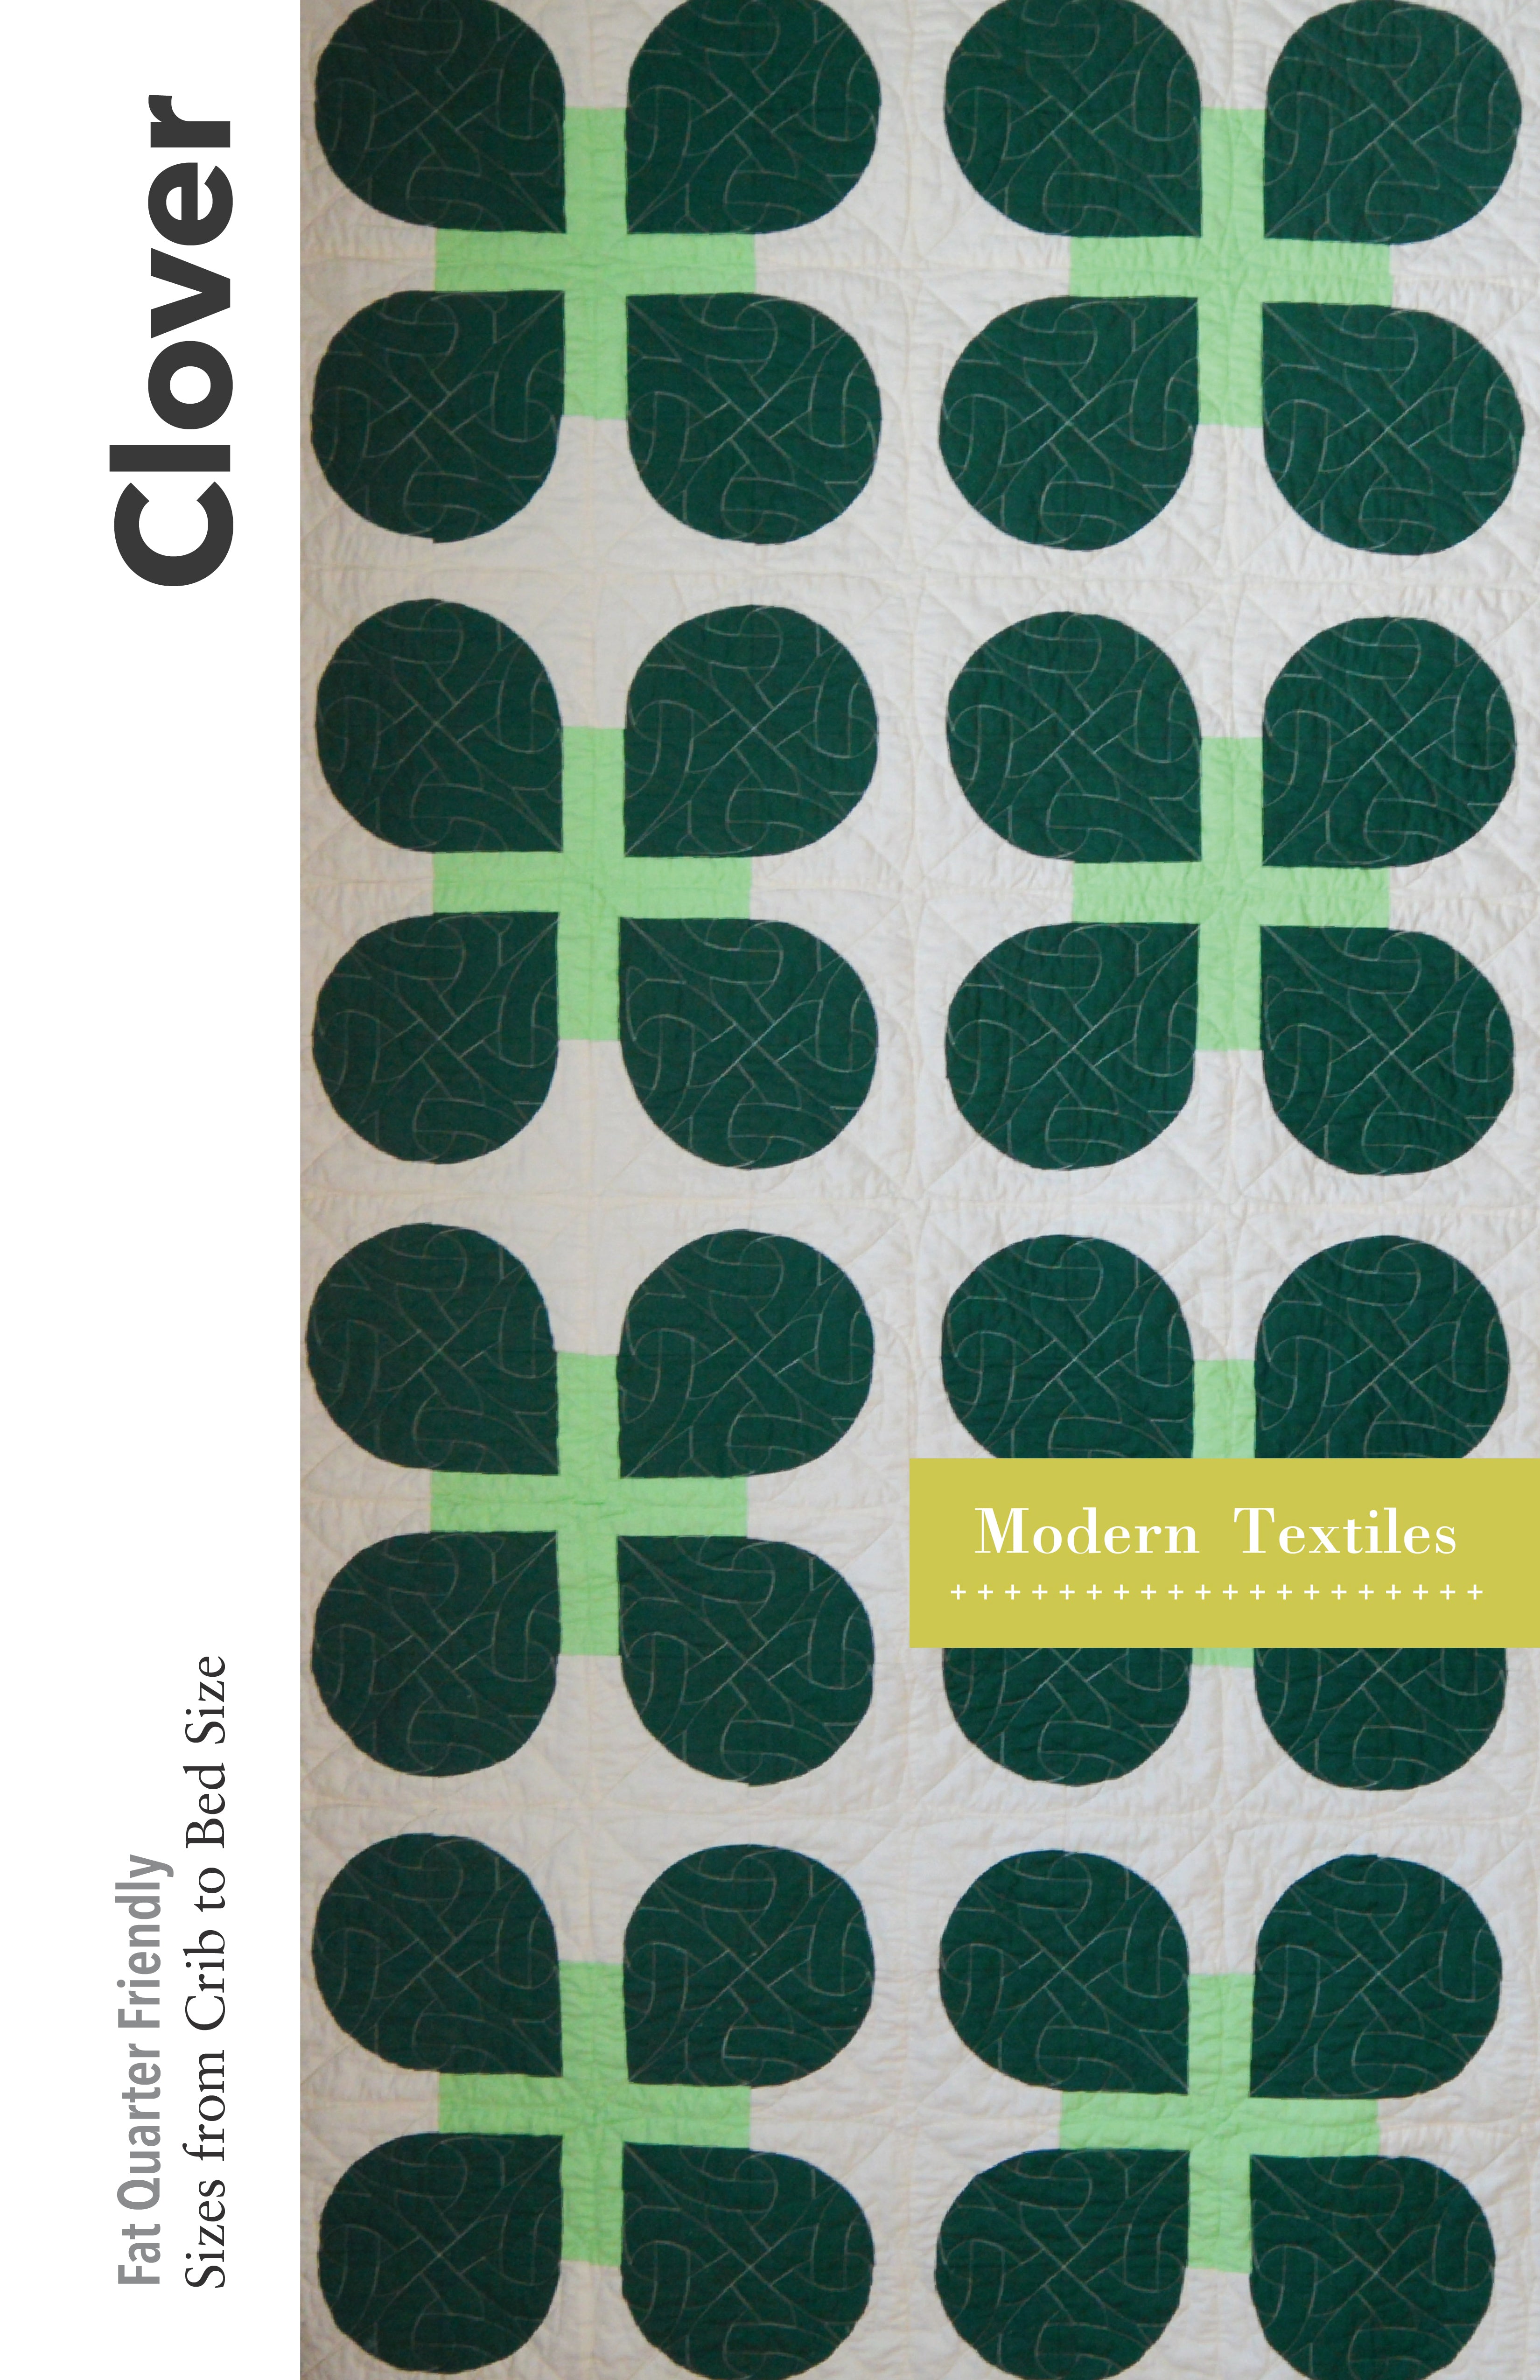 Clover Fabric Tube Maker, Notion - Free Pattern Download